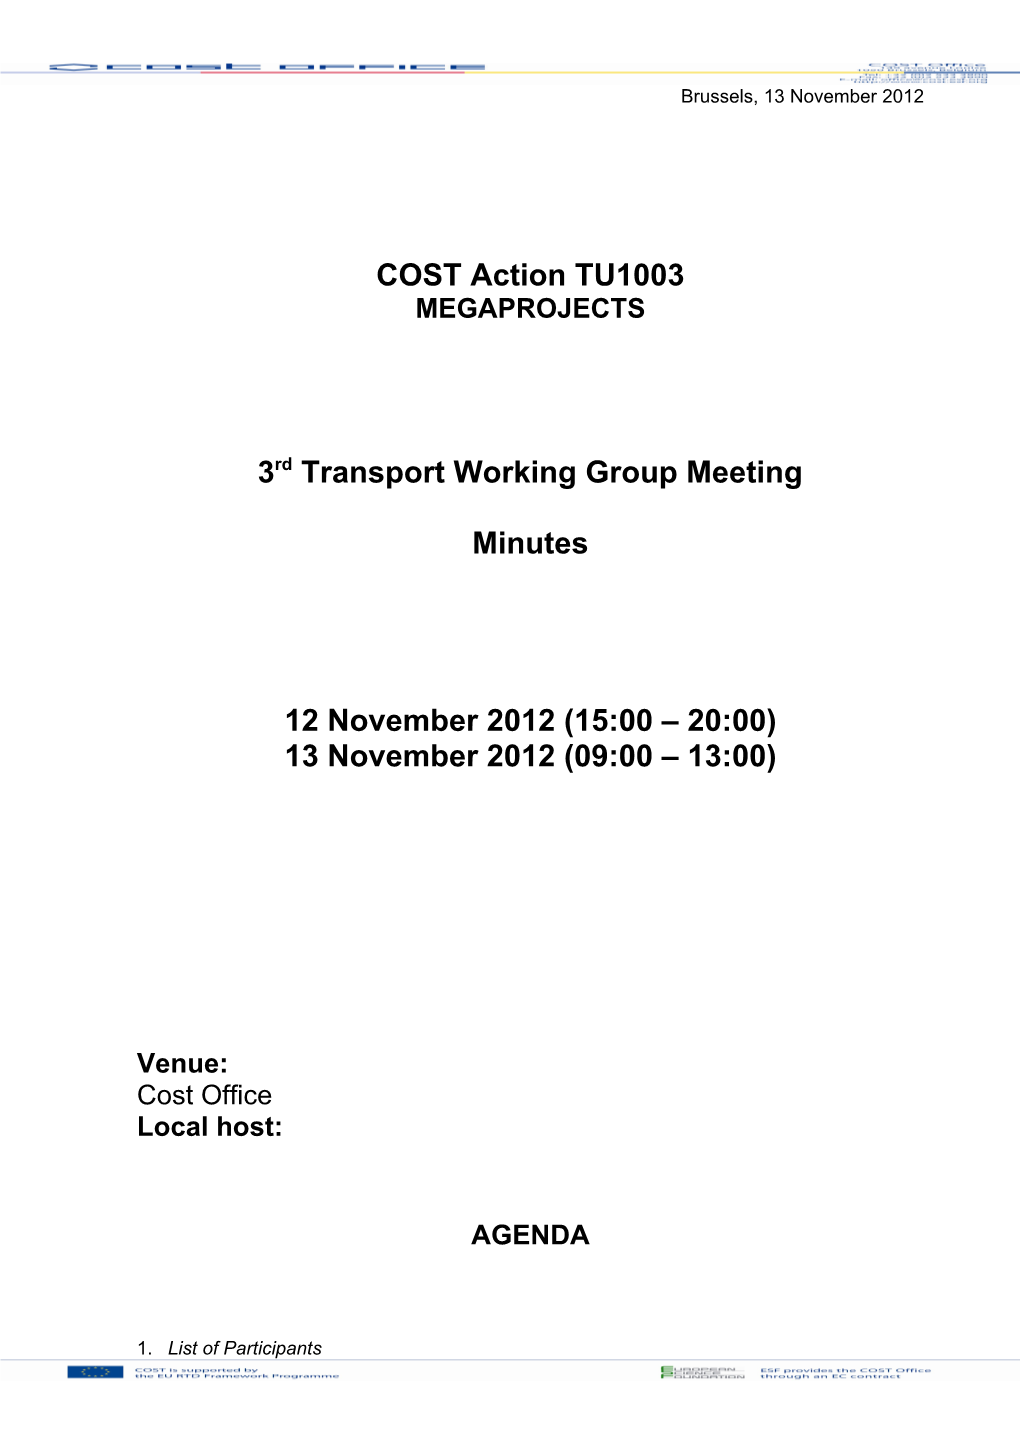 3Rd Transport Working Group Meeting